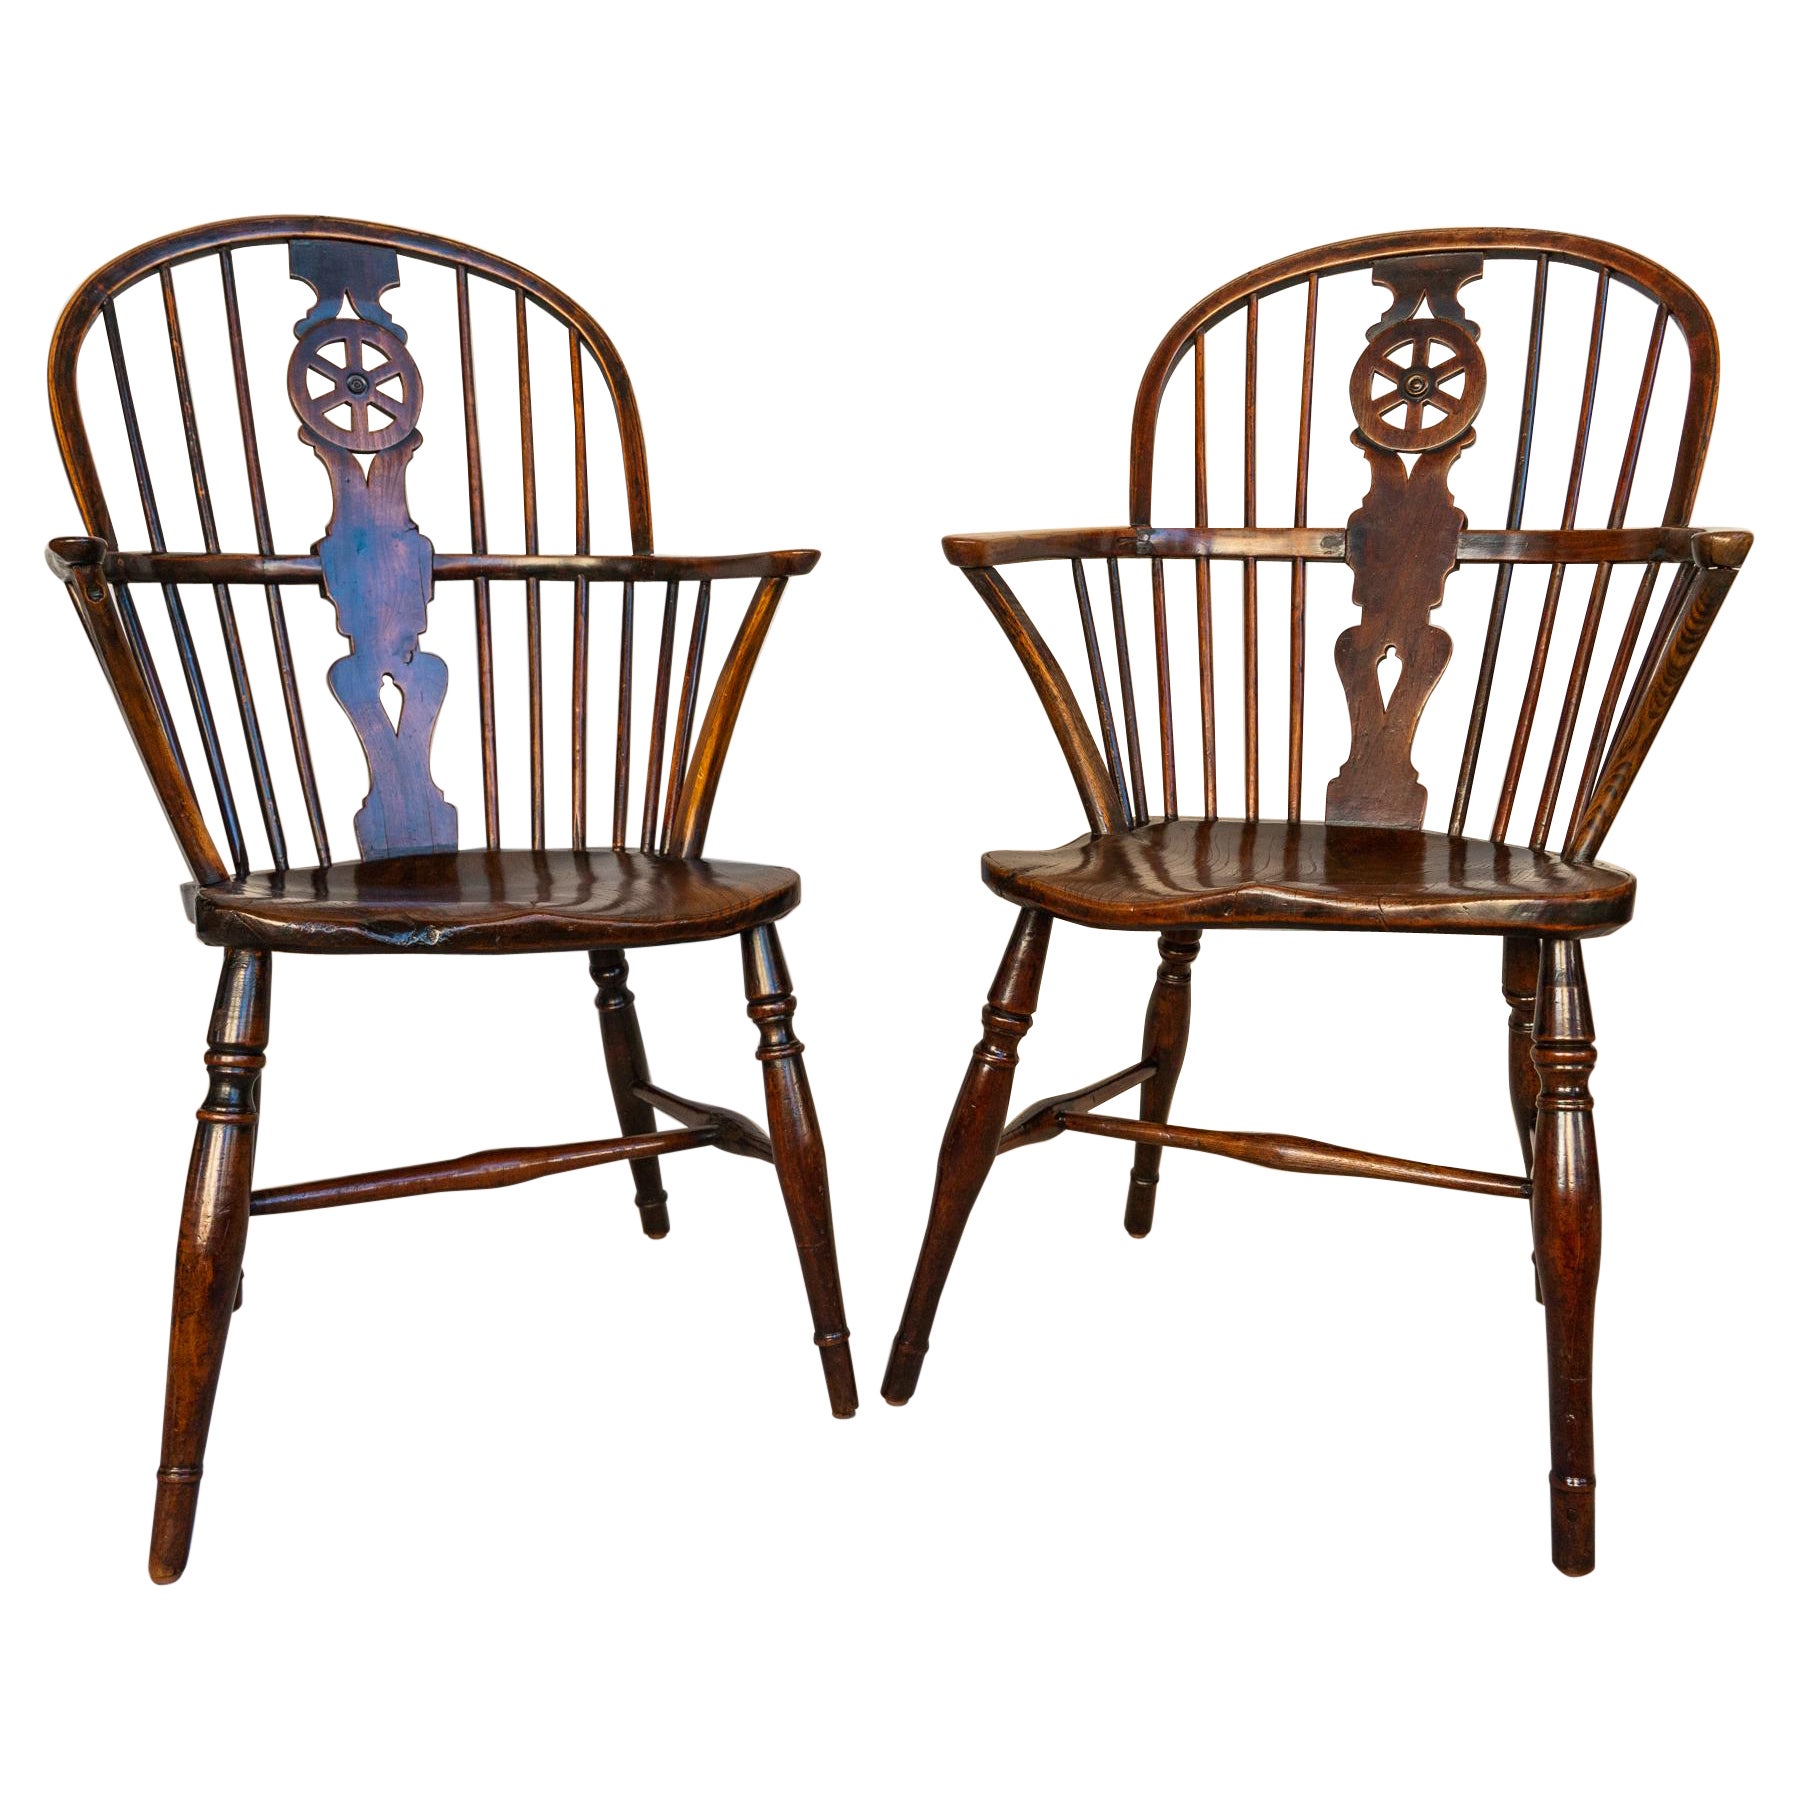 Pair of English Mid-19th Century Wheel Back Windsor Chairs